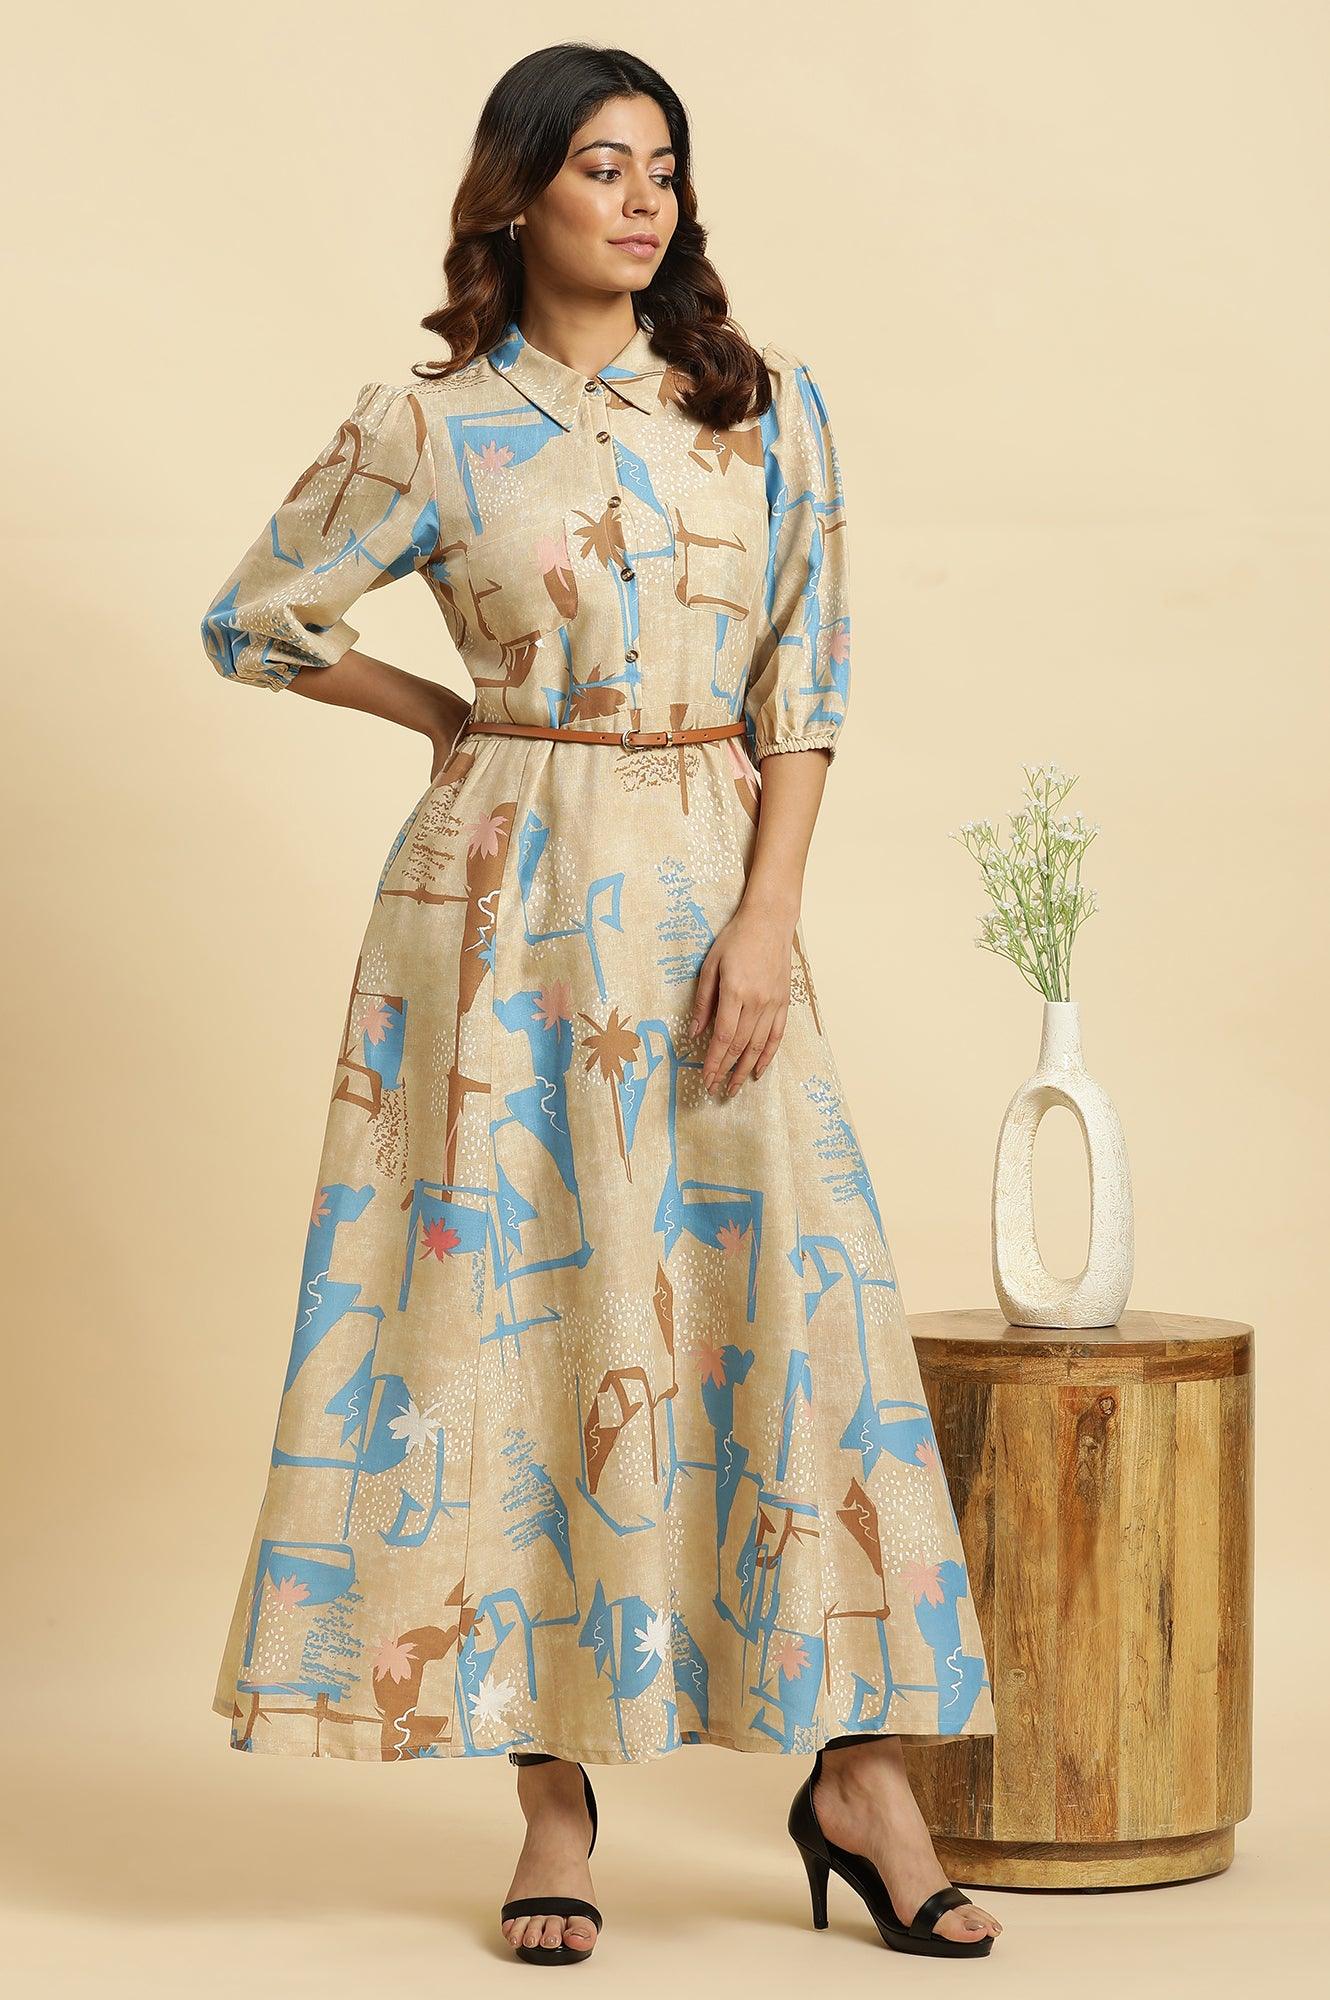 Beige Abstract Printed Western Long Dress With Belt - wforwoman